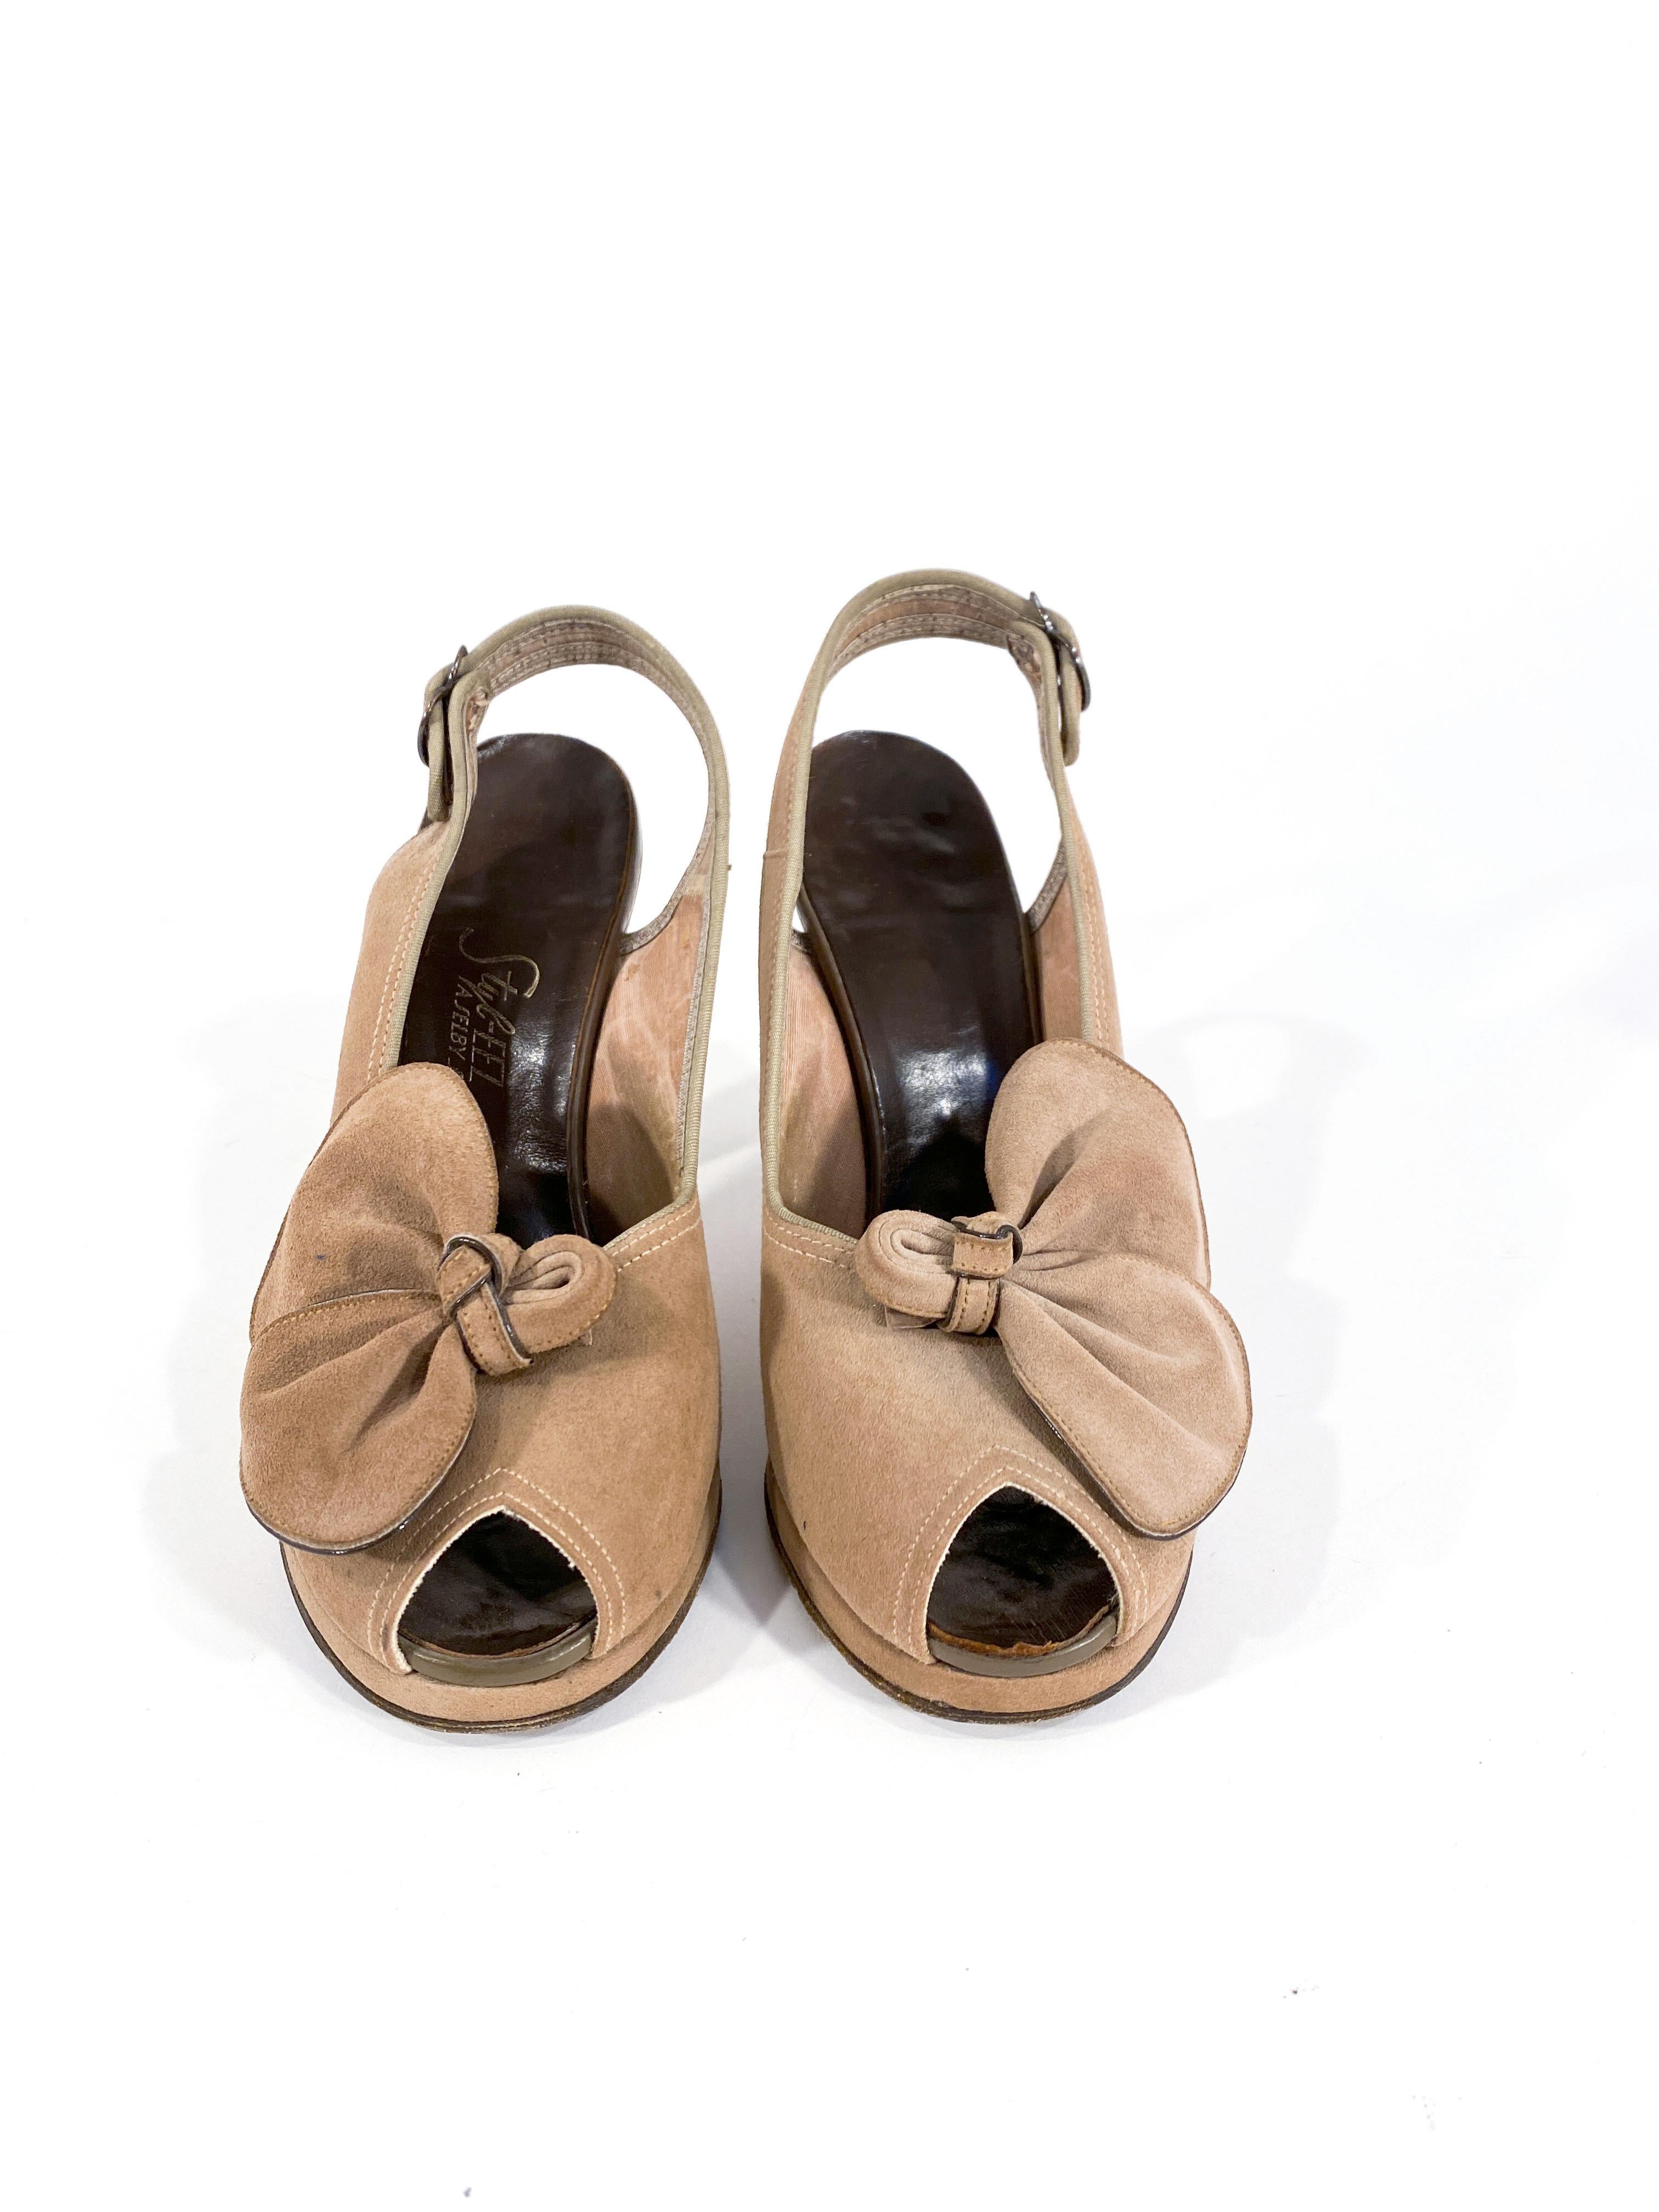 1940s cocoa brown colored suede sling-back peep-toe heels with a sensible platform, 3.5 inch heel, sculpted decorative bow and twill piping.